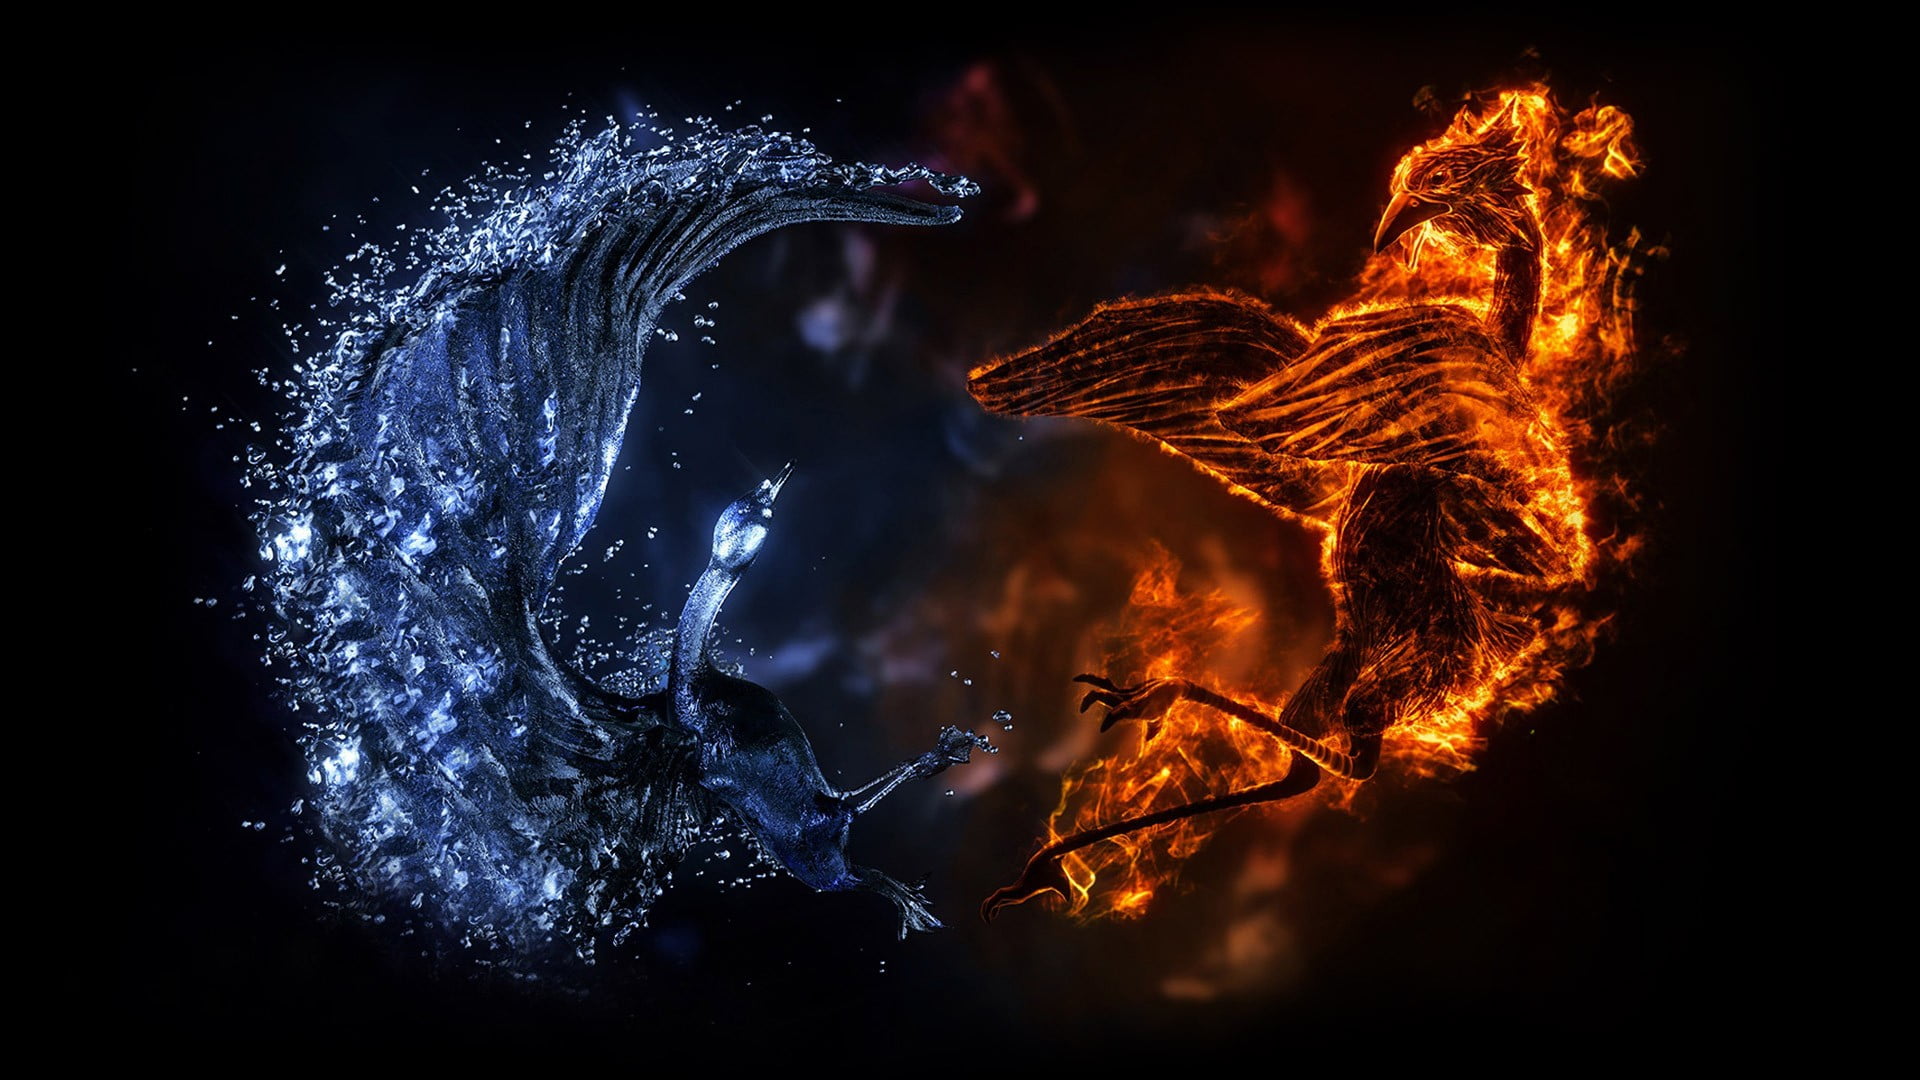 water and fire illustration, digital art, ice, birds, motion